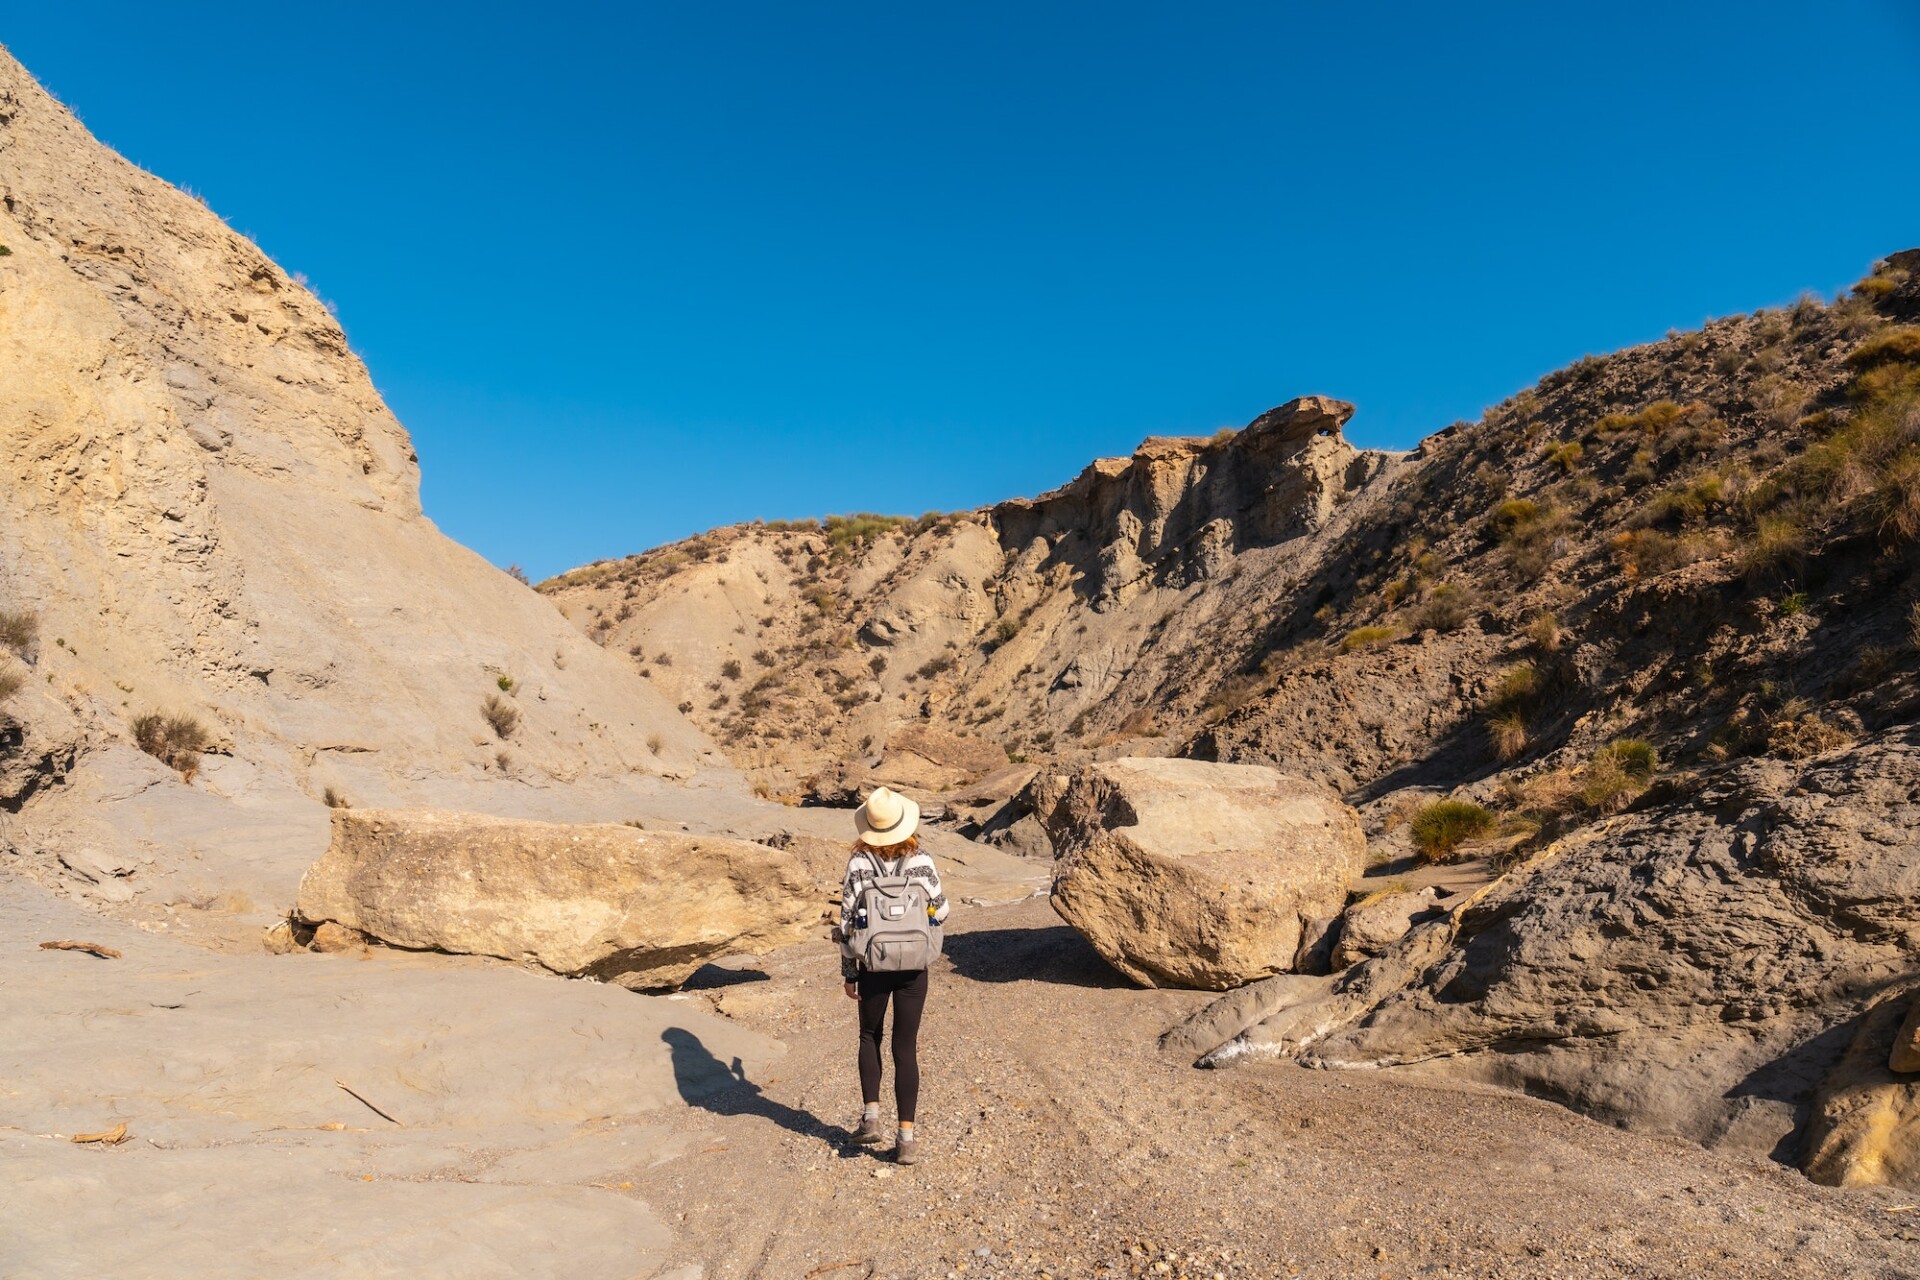 A young hiker in the desert of Tabernas, Almería province, Andalusia